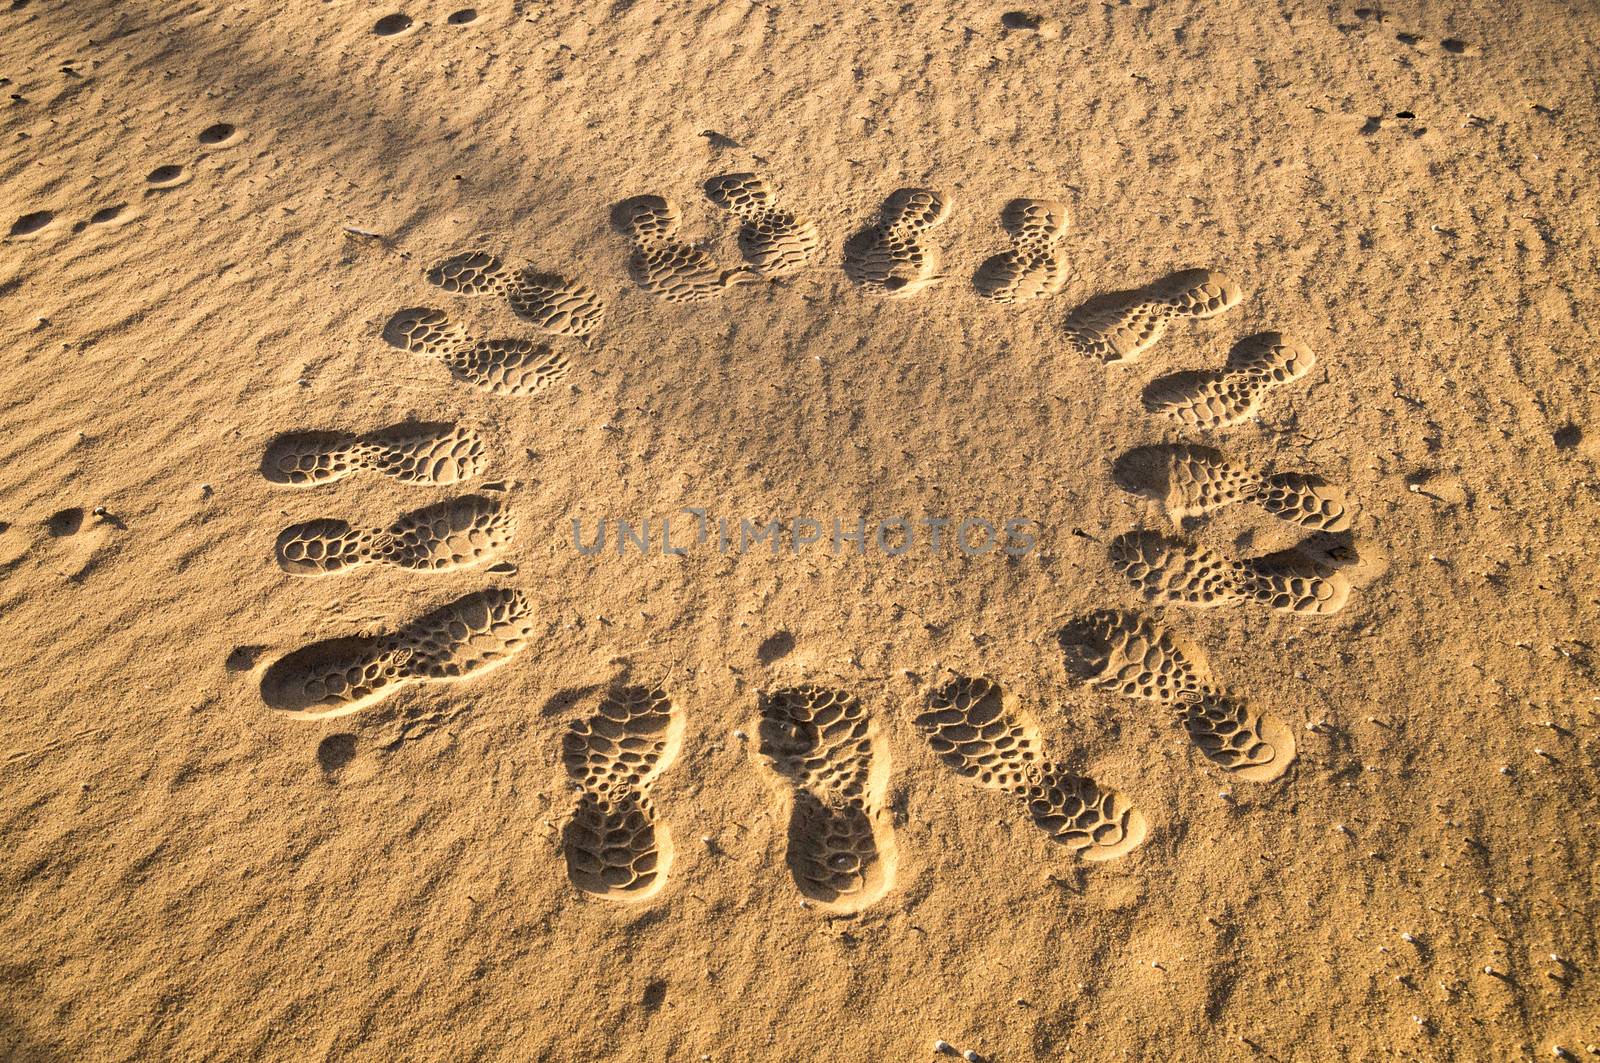 Circle of Footprints by emattil